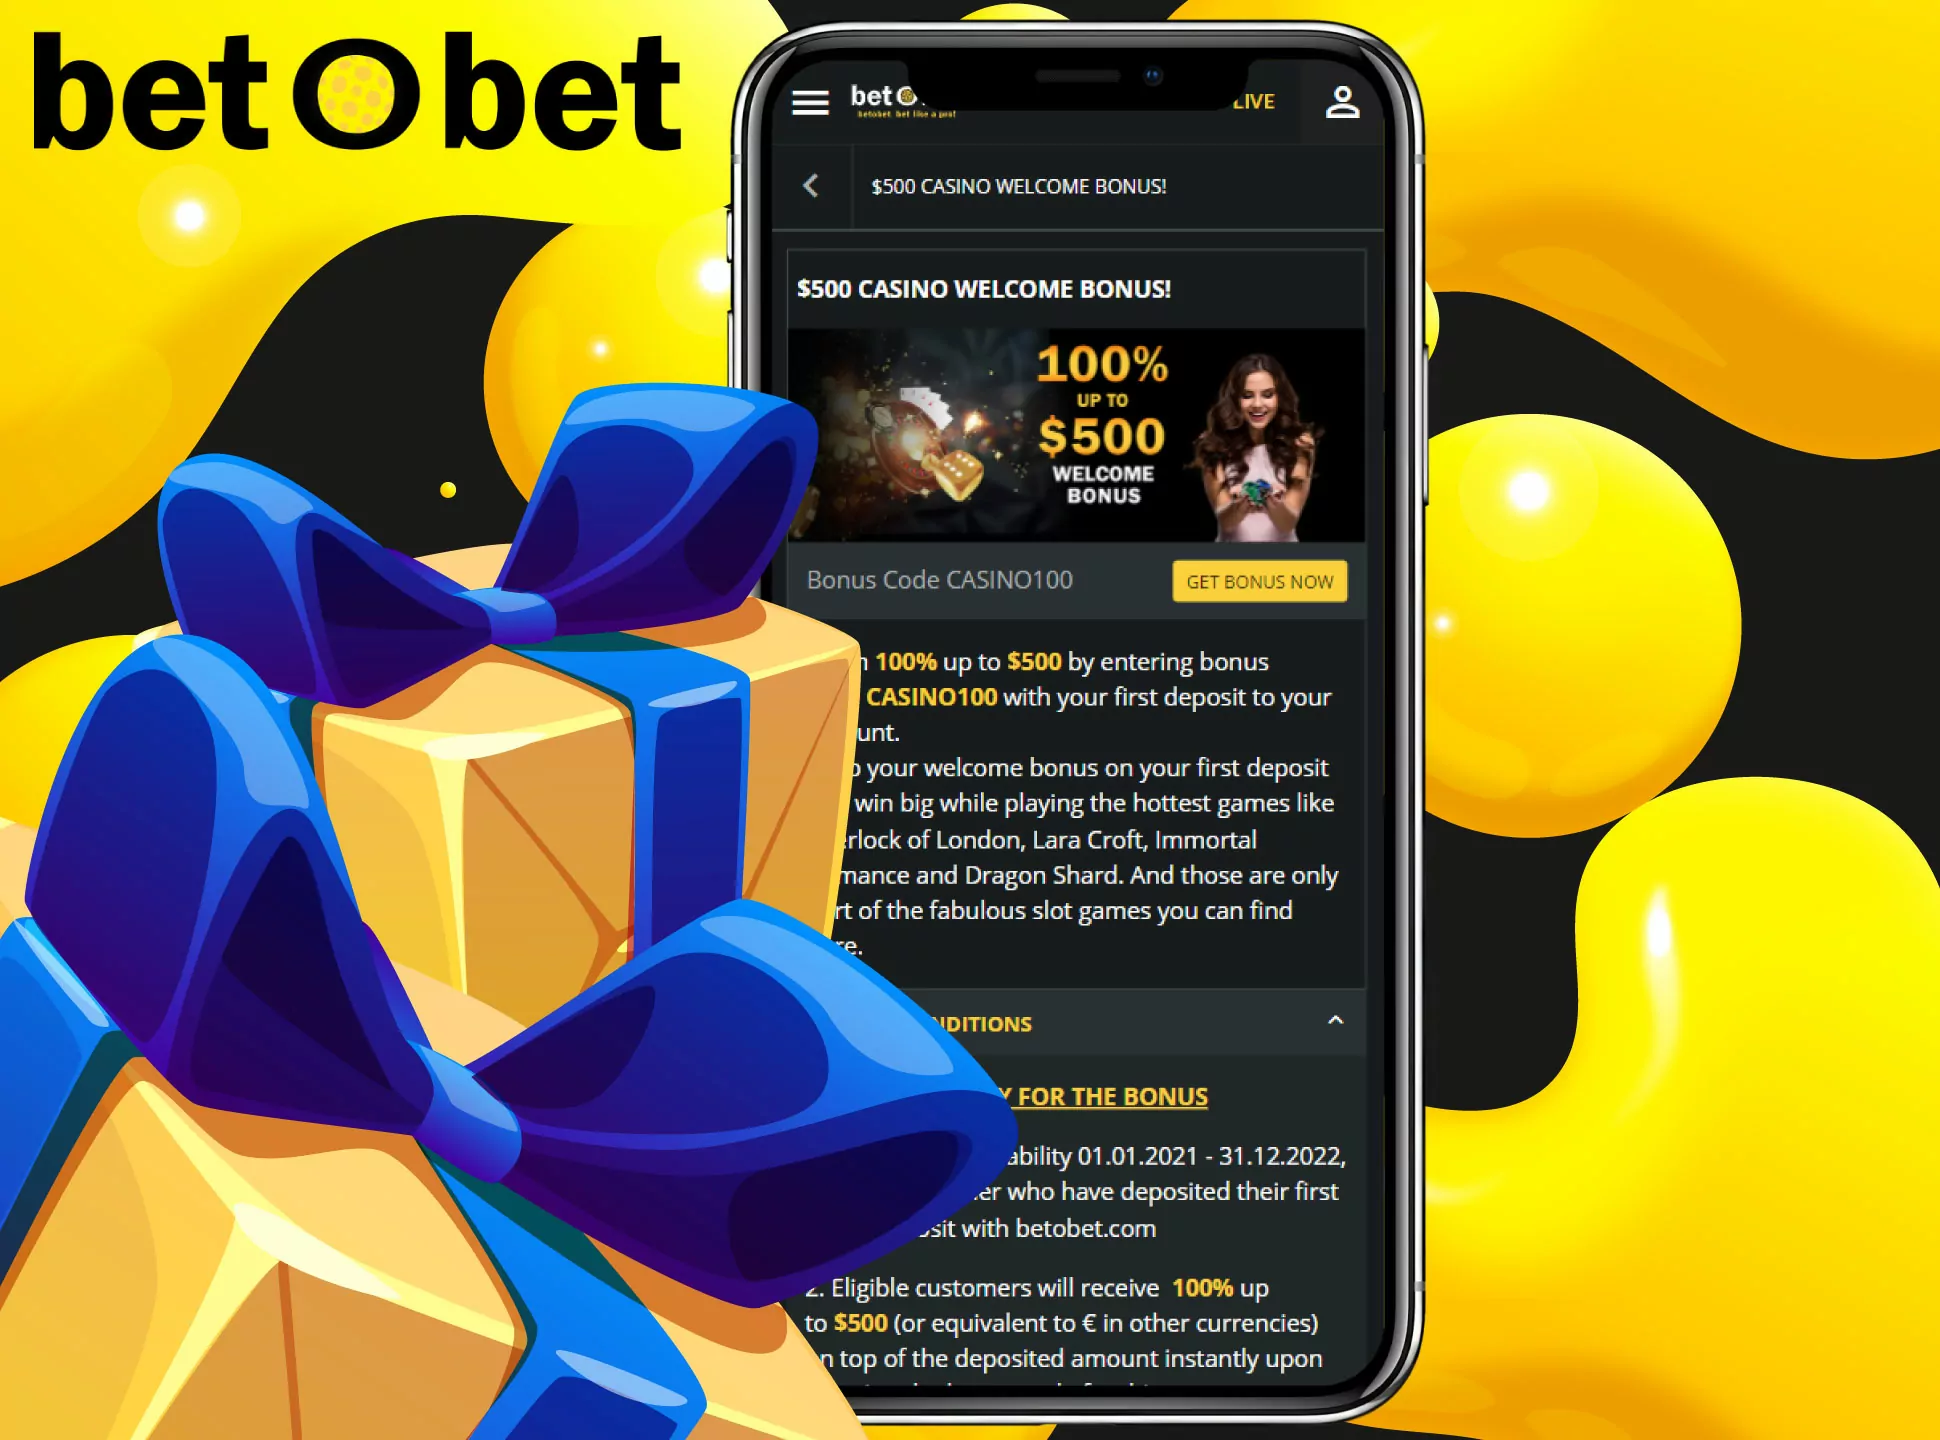 Betobet offers a lot of bonuses for its players.